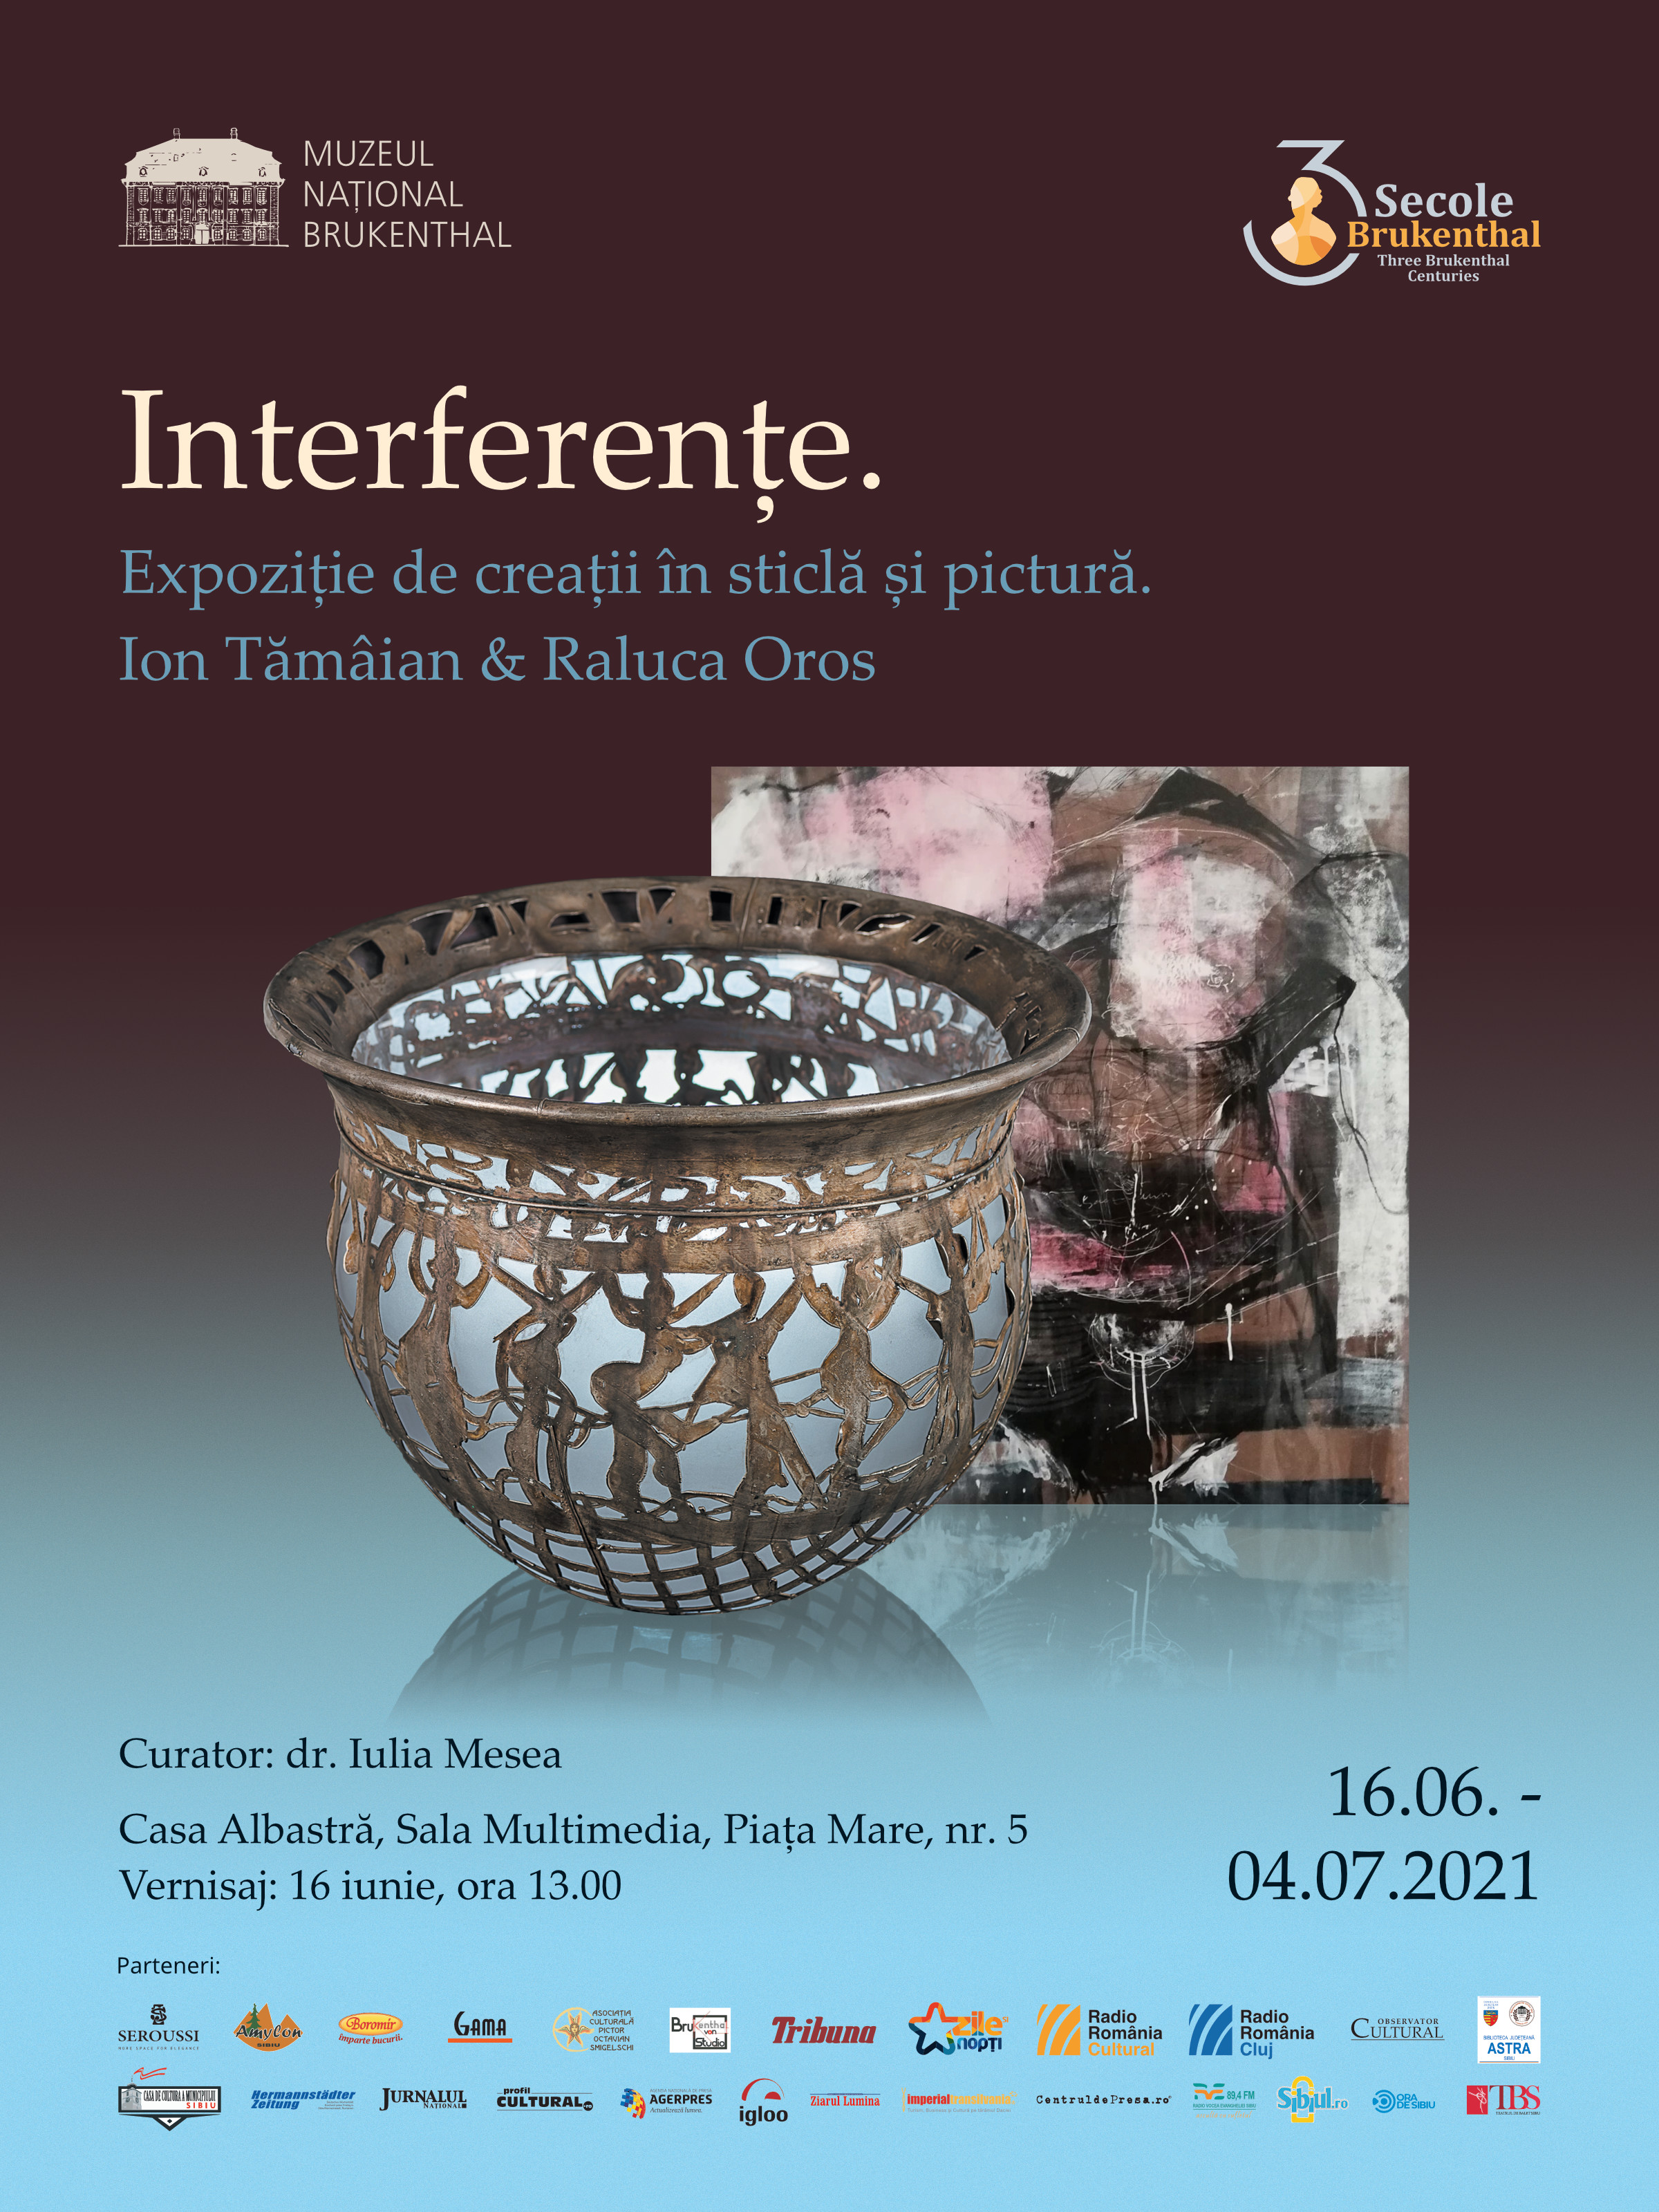  Interferences